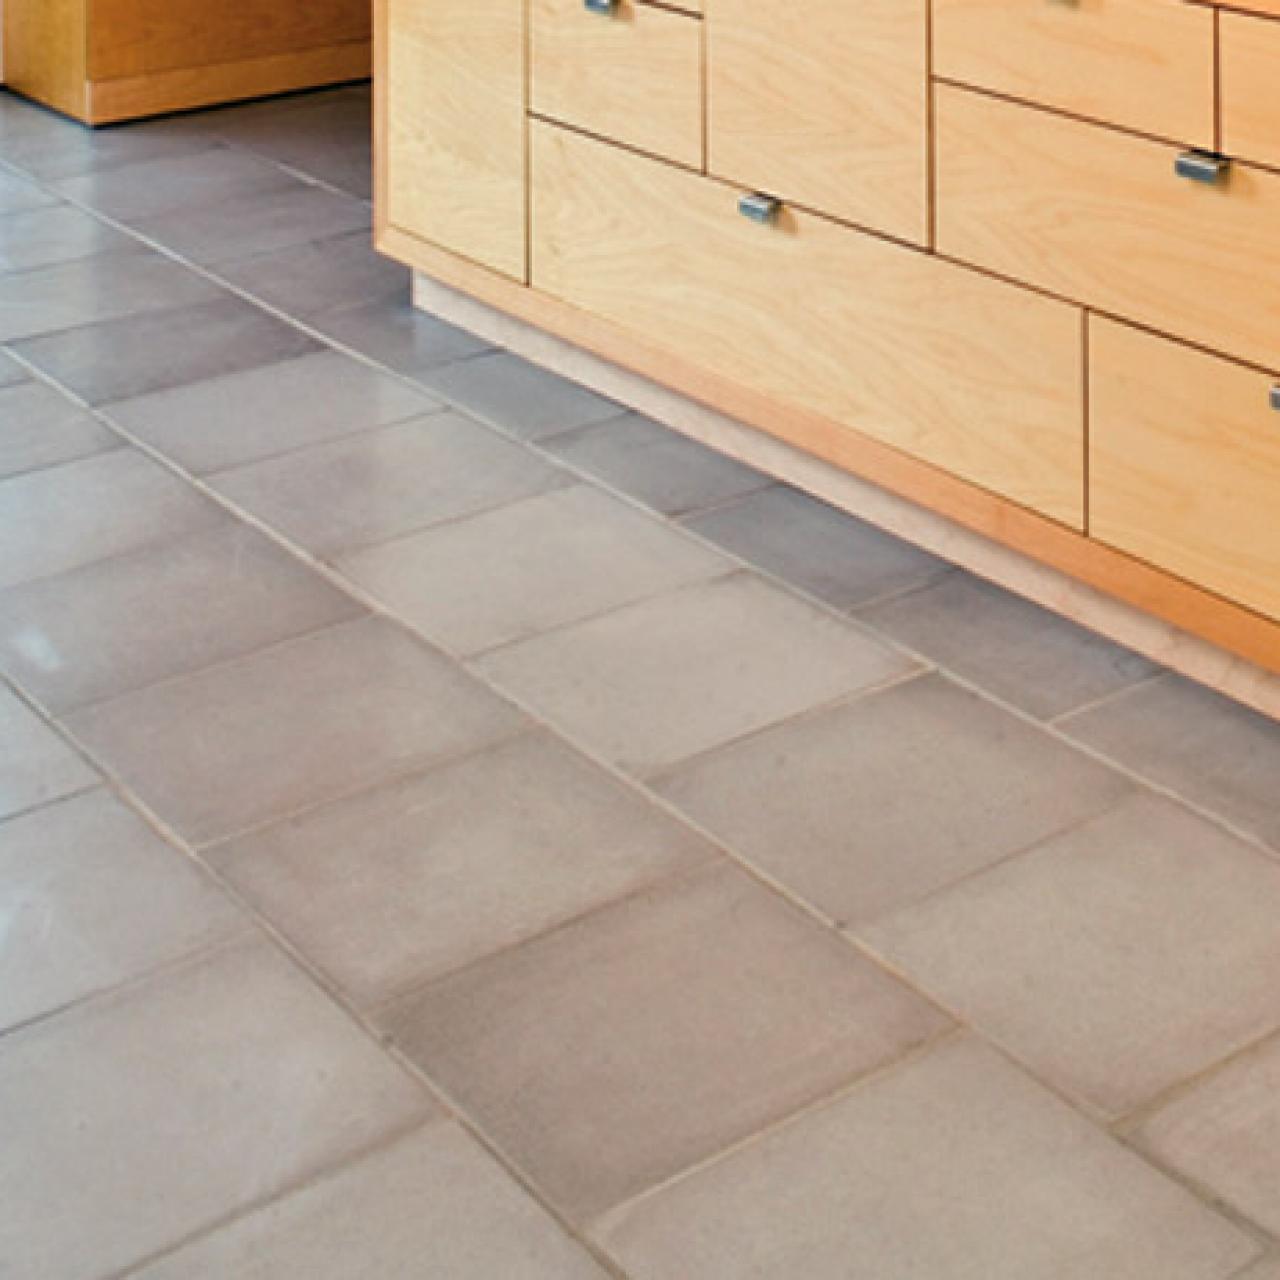 Big Box Tile - Ceramic & Porcelain Tiles - Style to Fall In Love With.